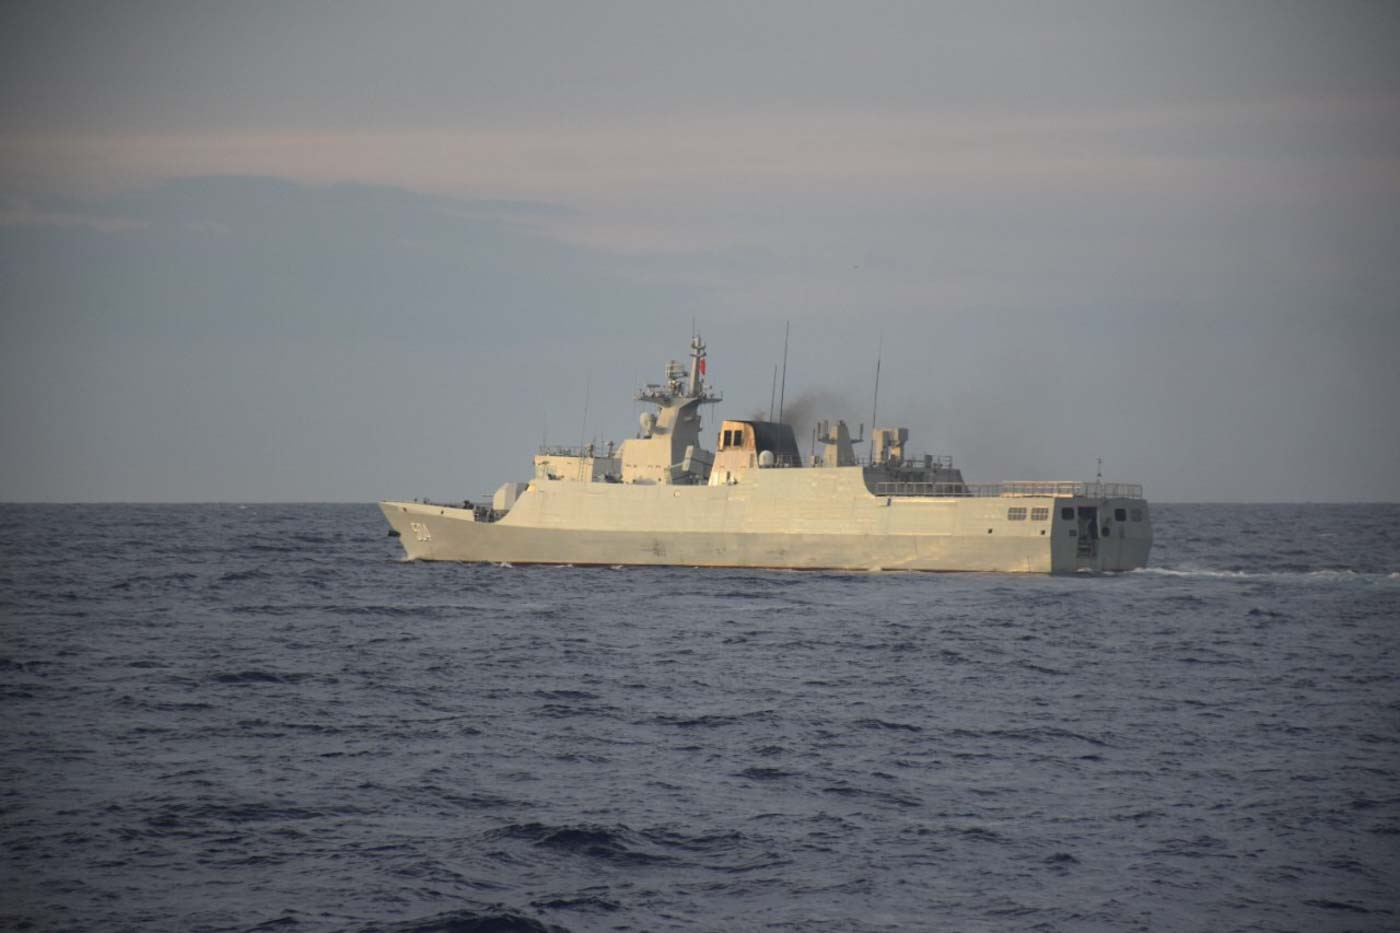 WARSHIP PASSAGE. Photo of a Chinese naval vessel by the Philippine Coast Guard 